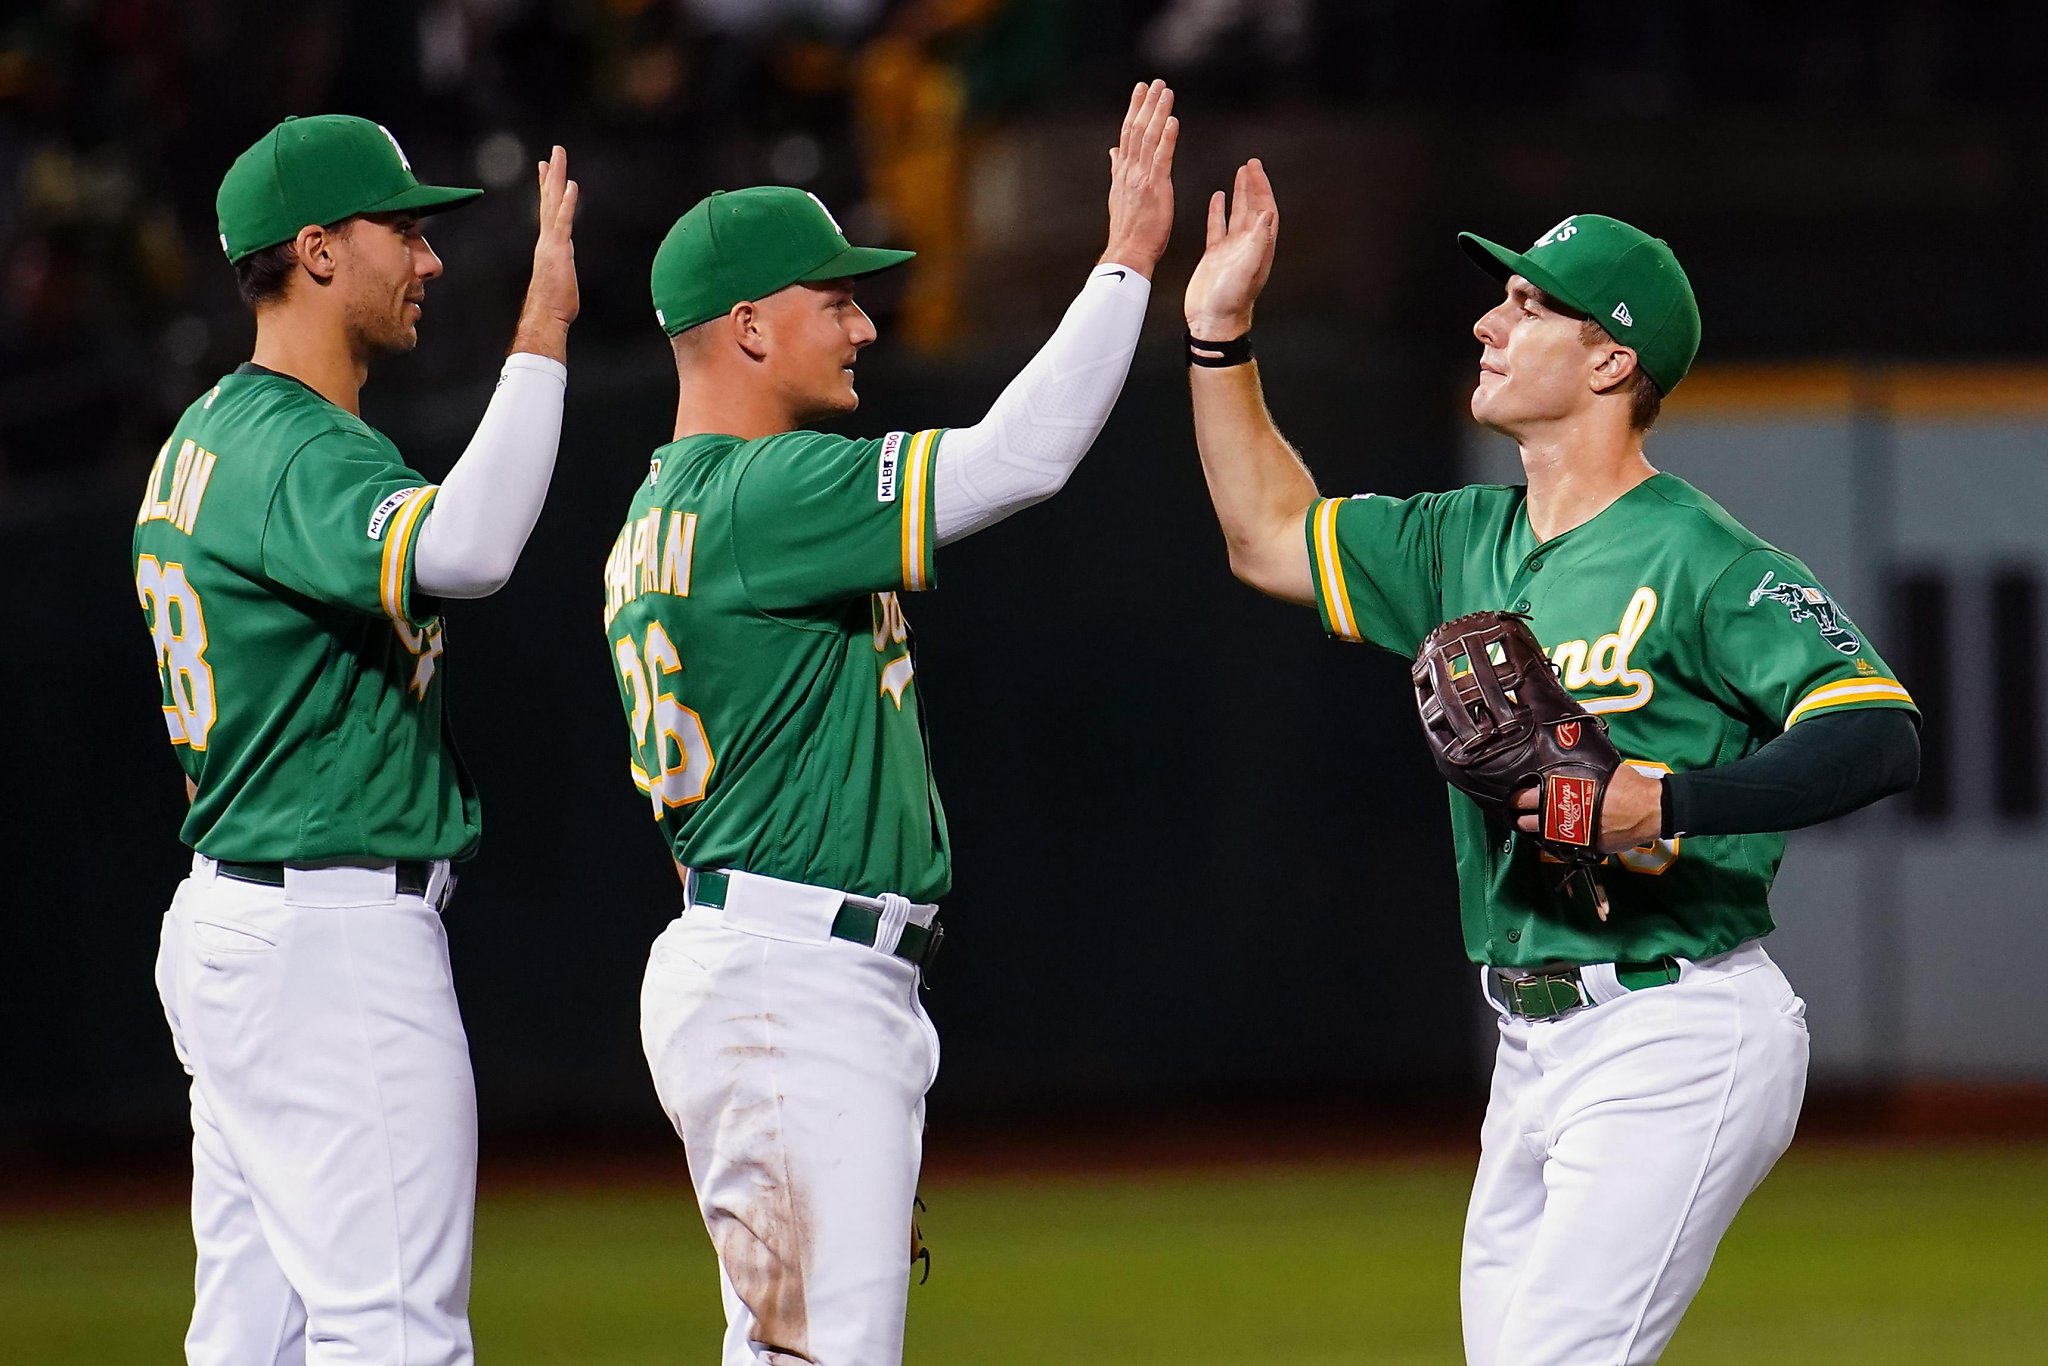 MLB preview 2019: The Oakland A's are going to hit a lot of home